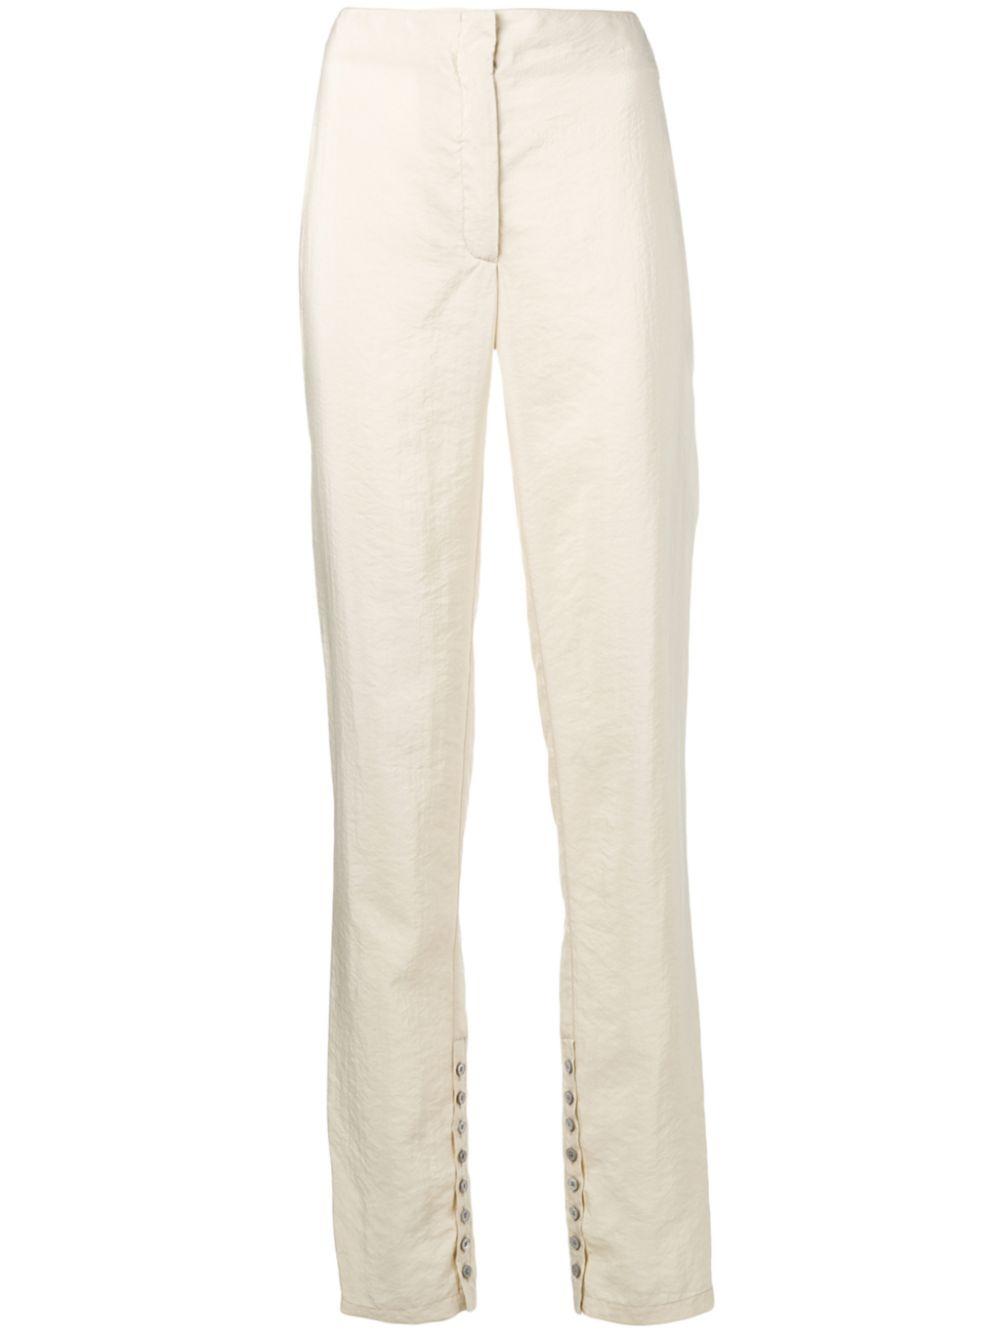 Lemaire Silk Fitted High-waisted Trousers in Natural - Lyst